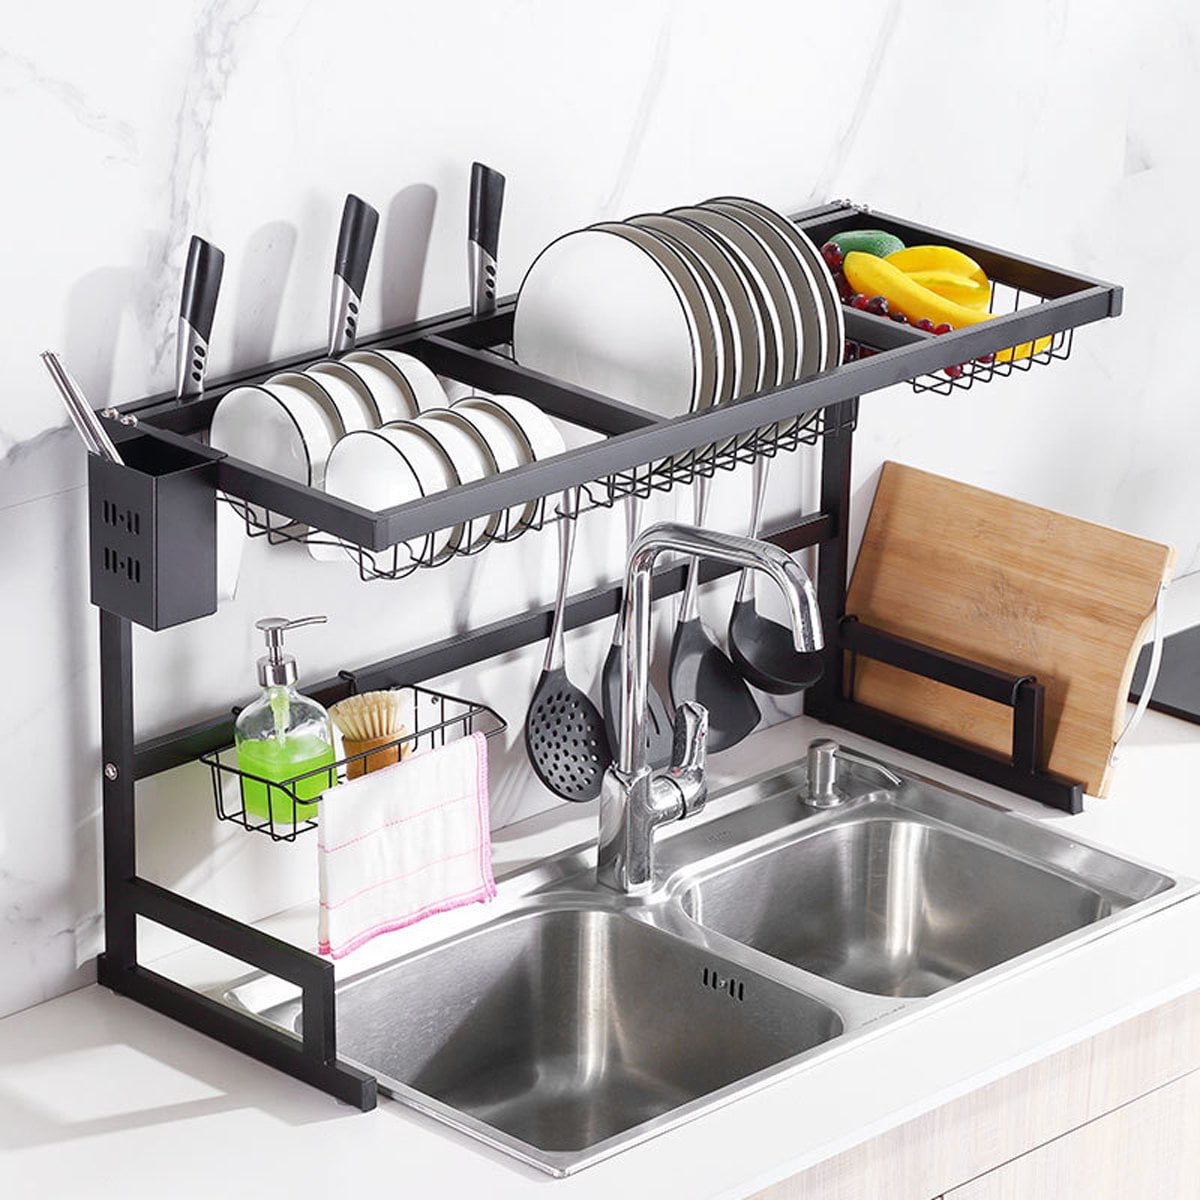 Kitchen Dish Drainer Dry Rack Plate Bowl Cutlery Sink Tool Holder Chrome Storage 